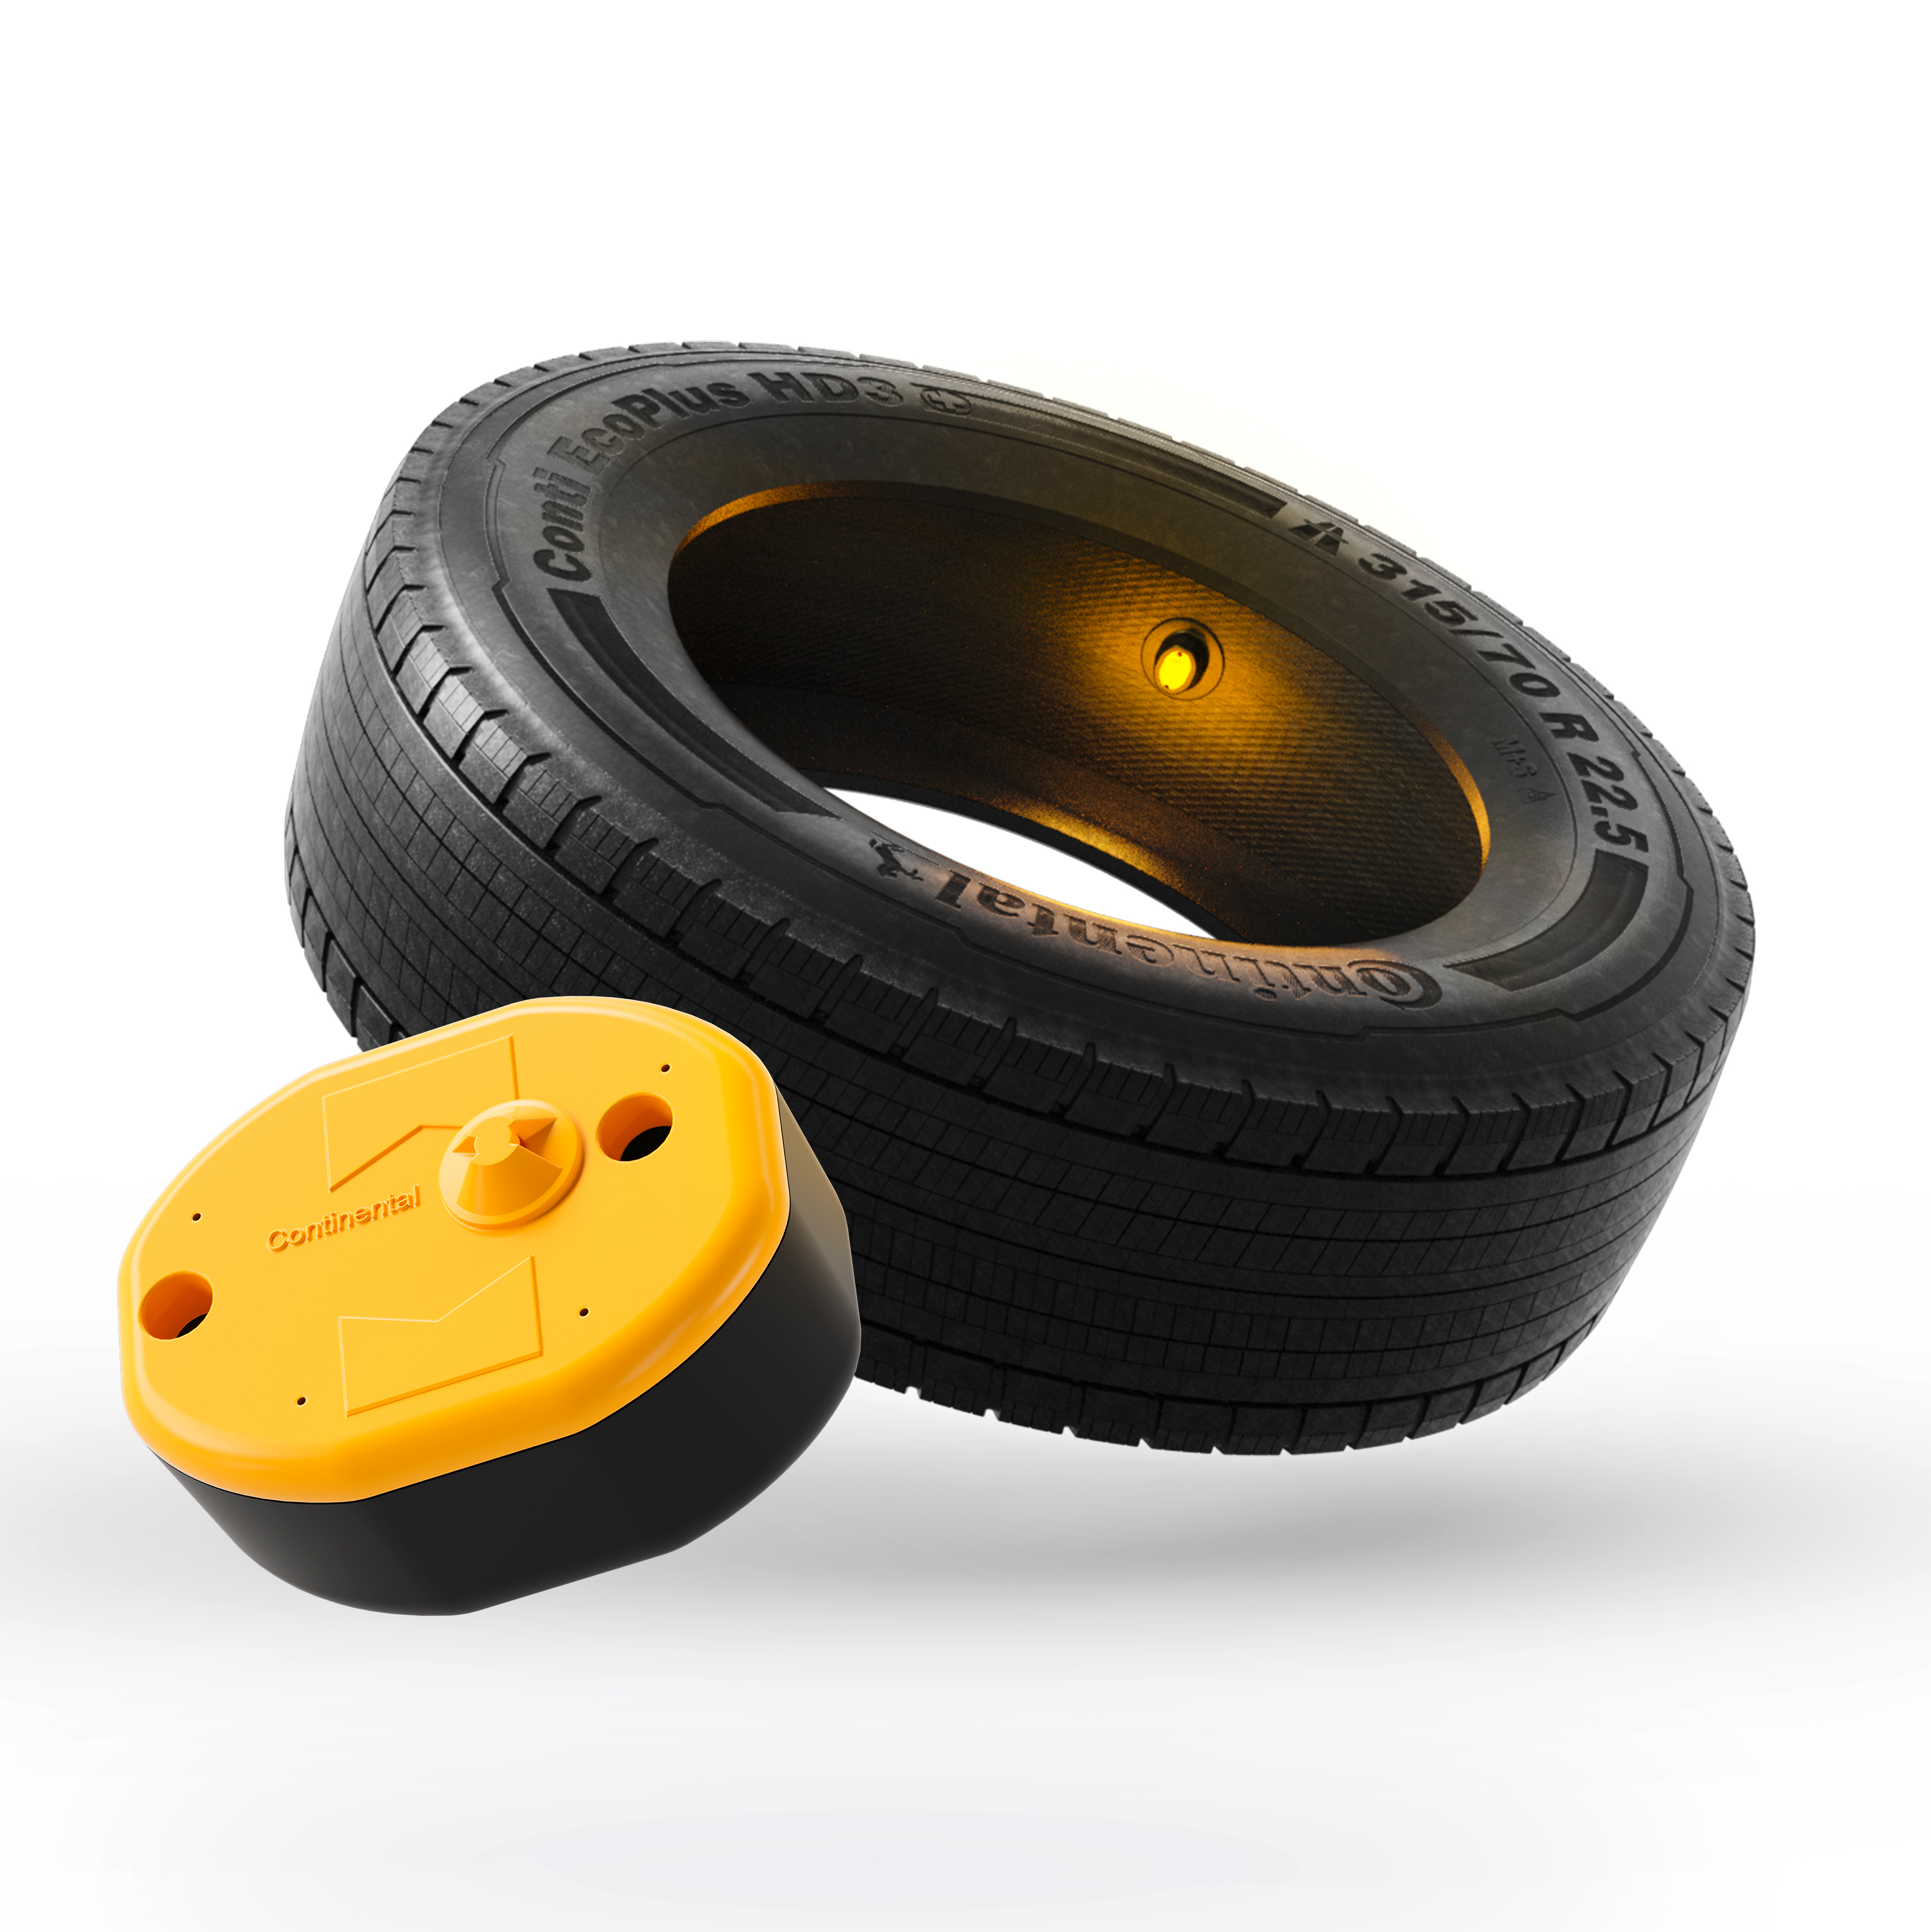 In addition to tire inflation pressure, our advanced sensor technology can also record tire mileage.